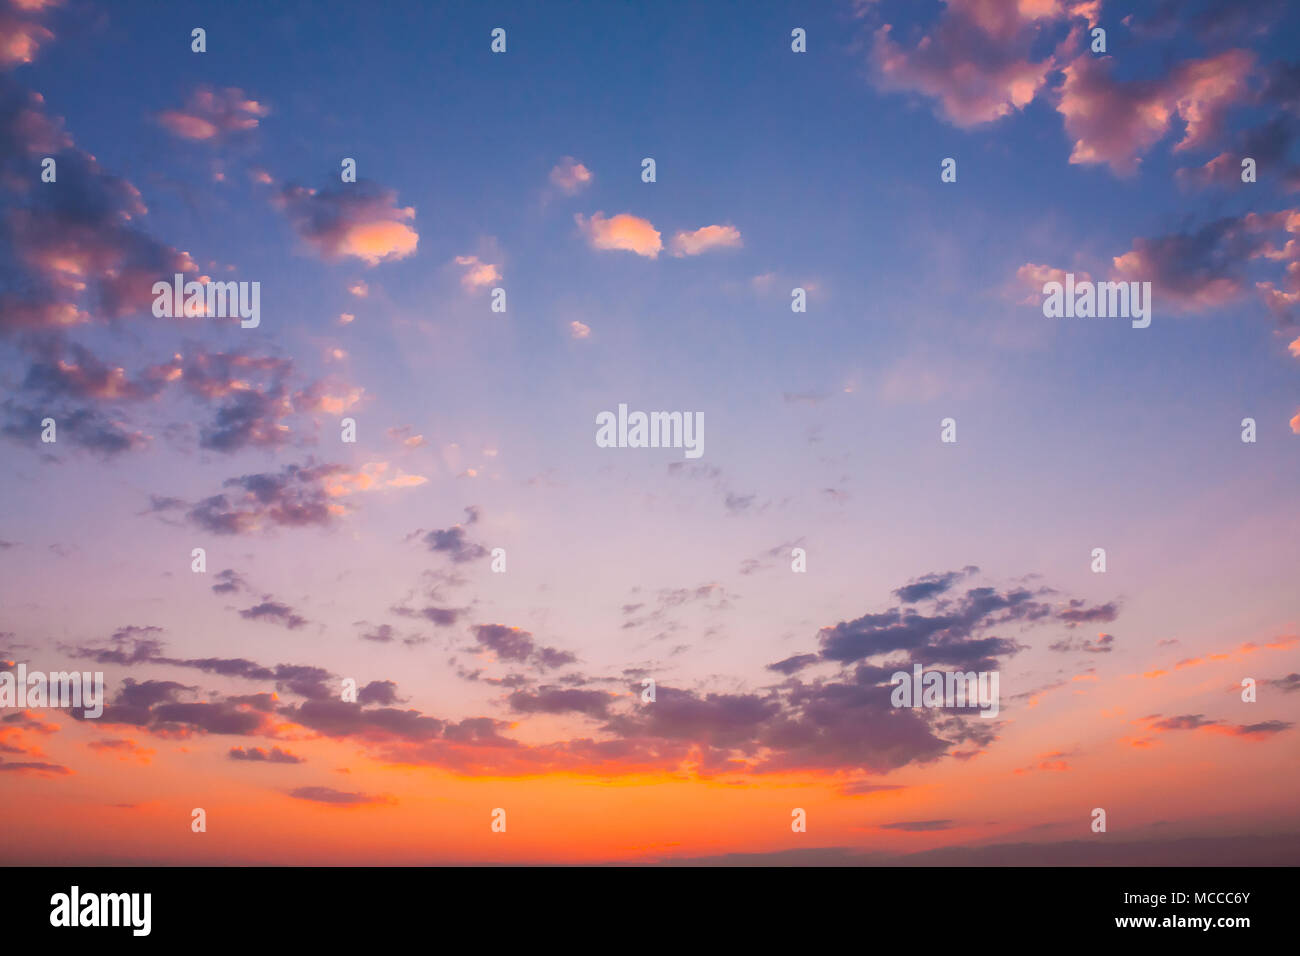 Sunset Sunrise Sky Background. Natural Bright Dramatic Sky In Sunset Dawn Sunrise. Yellow And Pink Colors Stock Photo